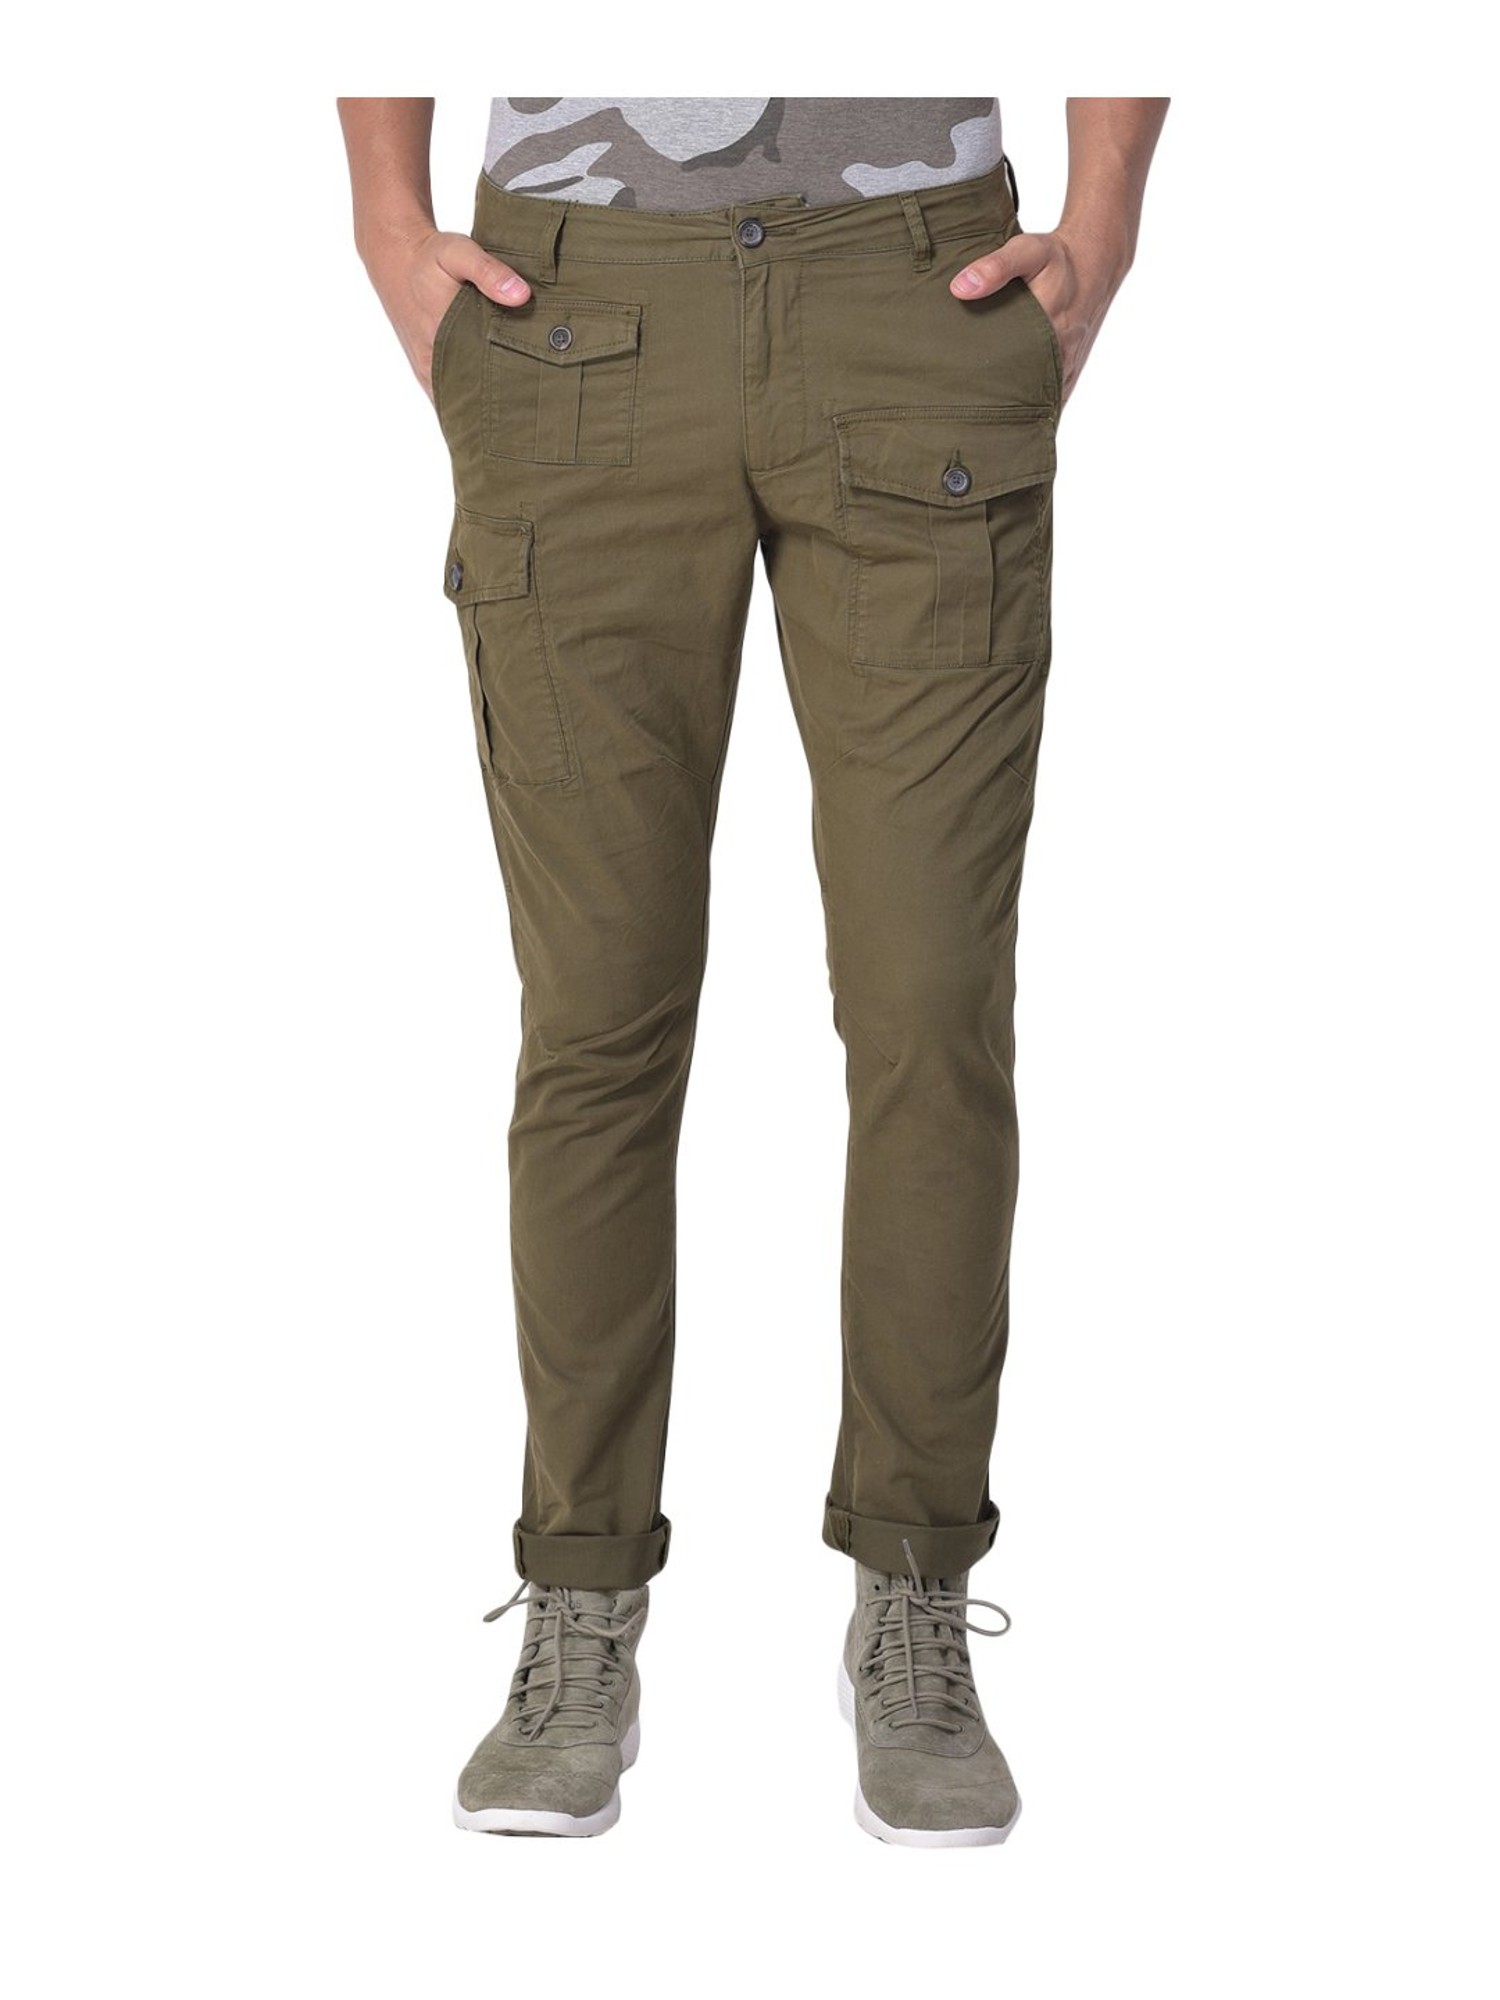 Buy Army Cargo Pants Online In India - Etsy India